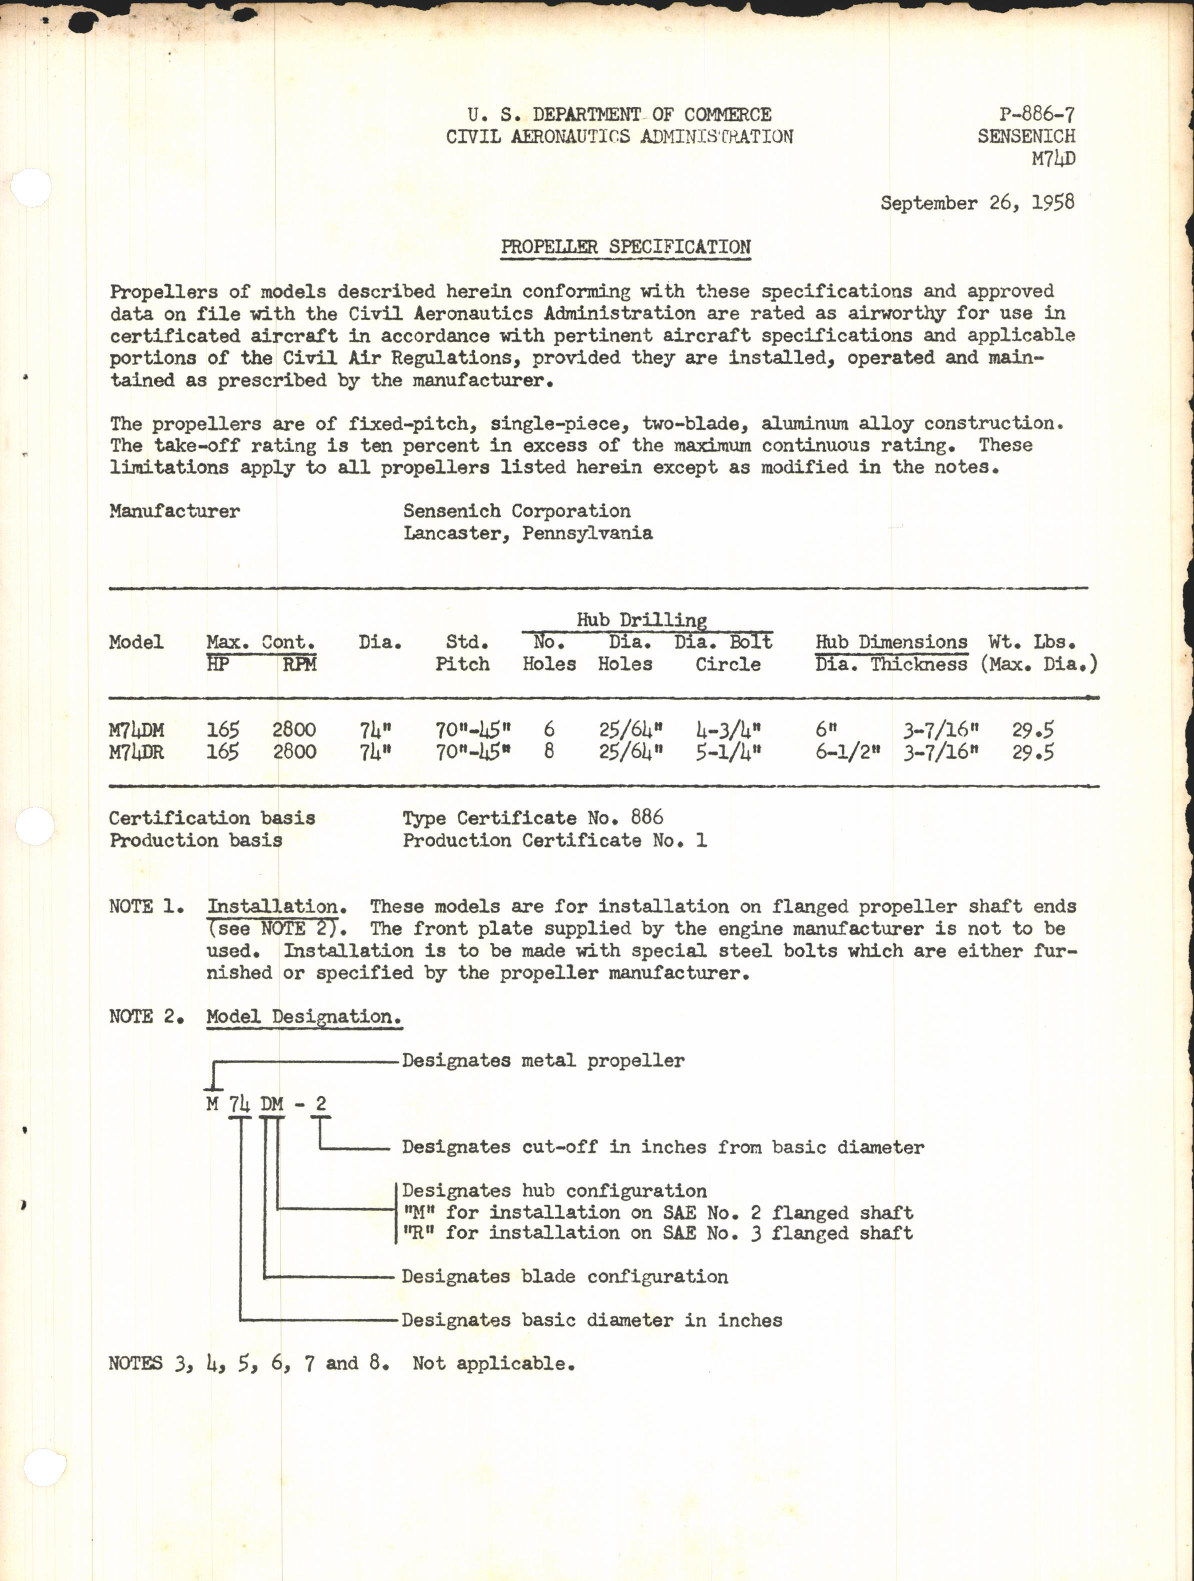 Sample page 1 from AirCorps Library document: M74D